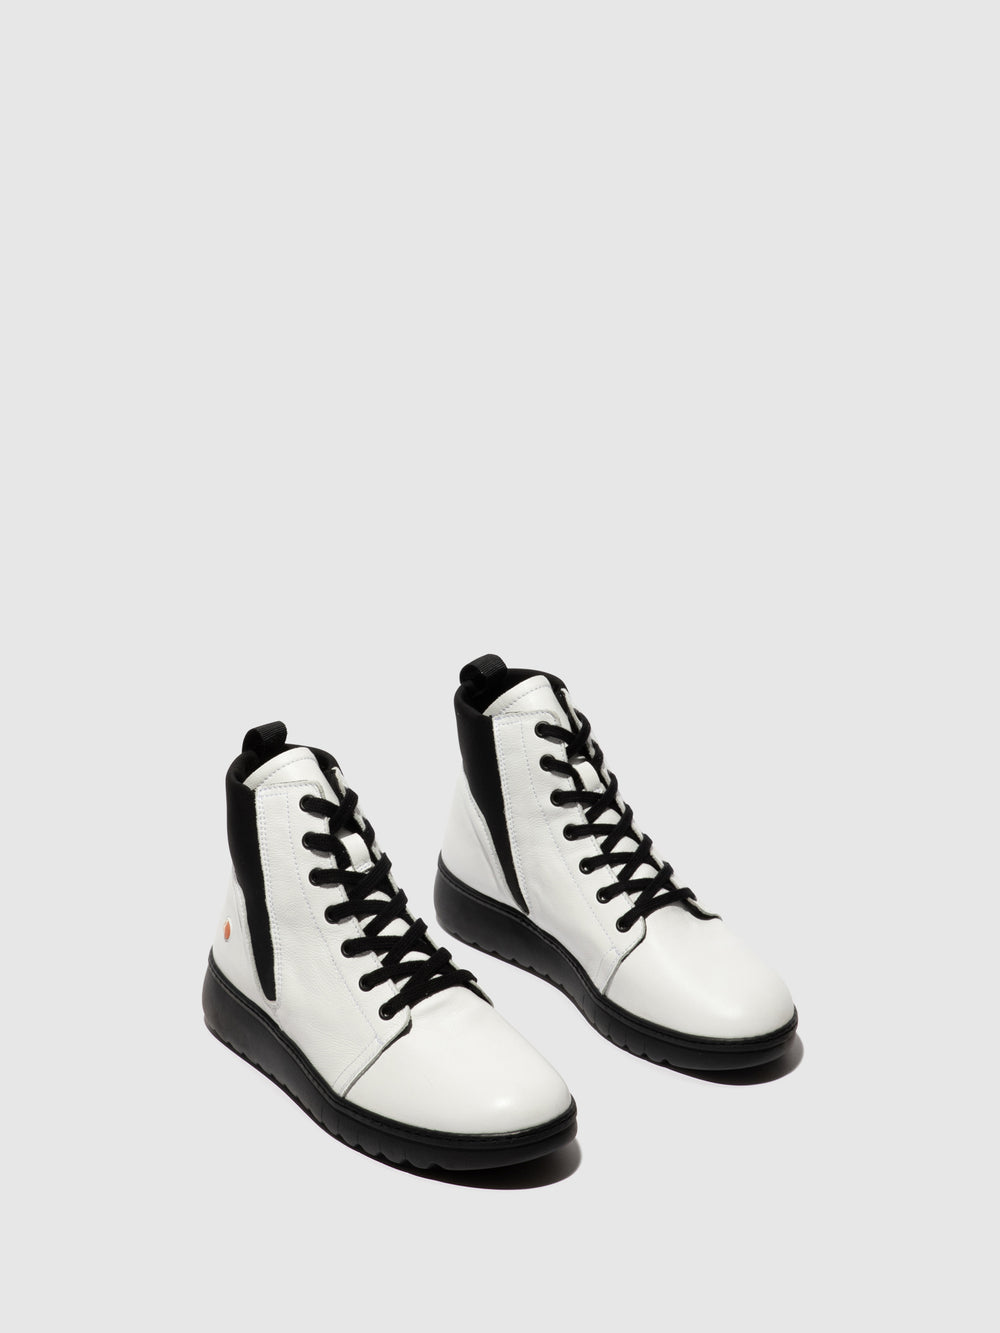 Lace-up Ankle Boots EDIN713SOF WHITE/BLACK NEOPRENE